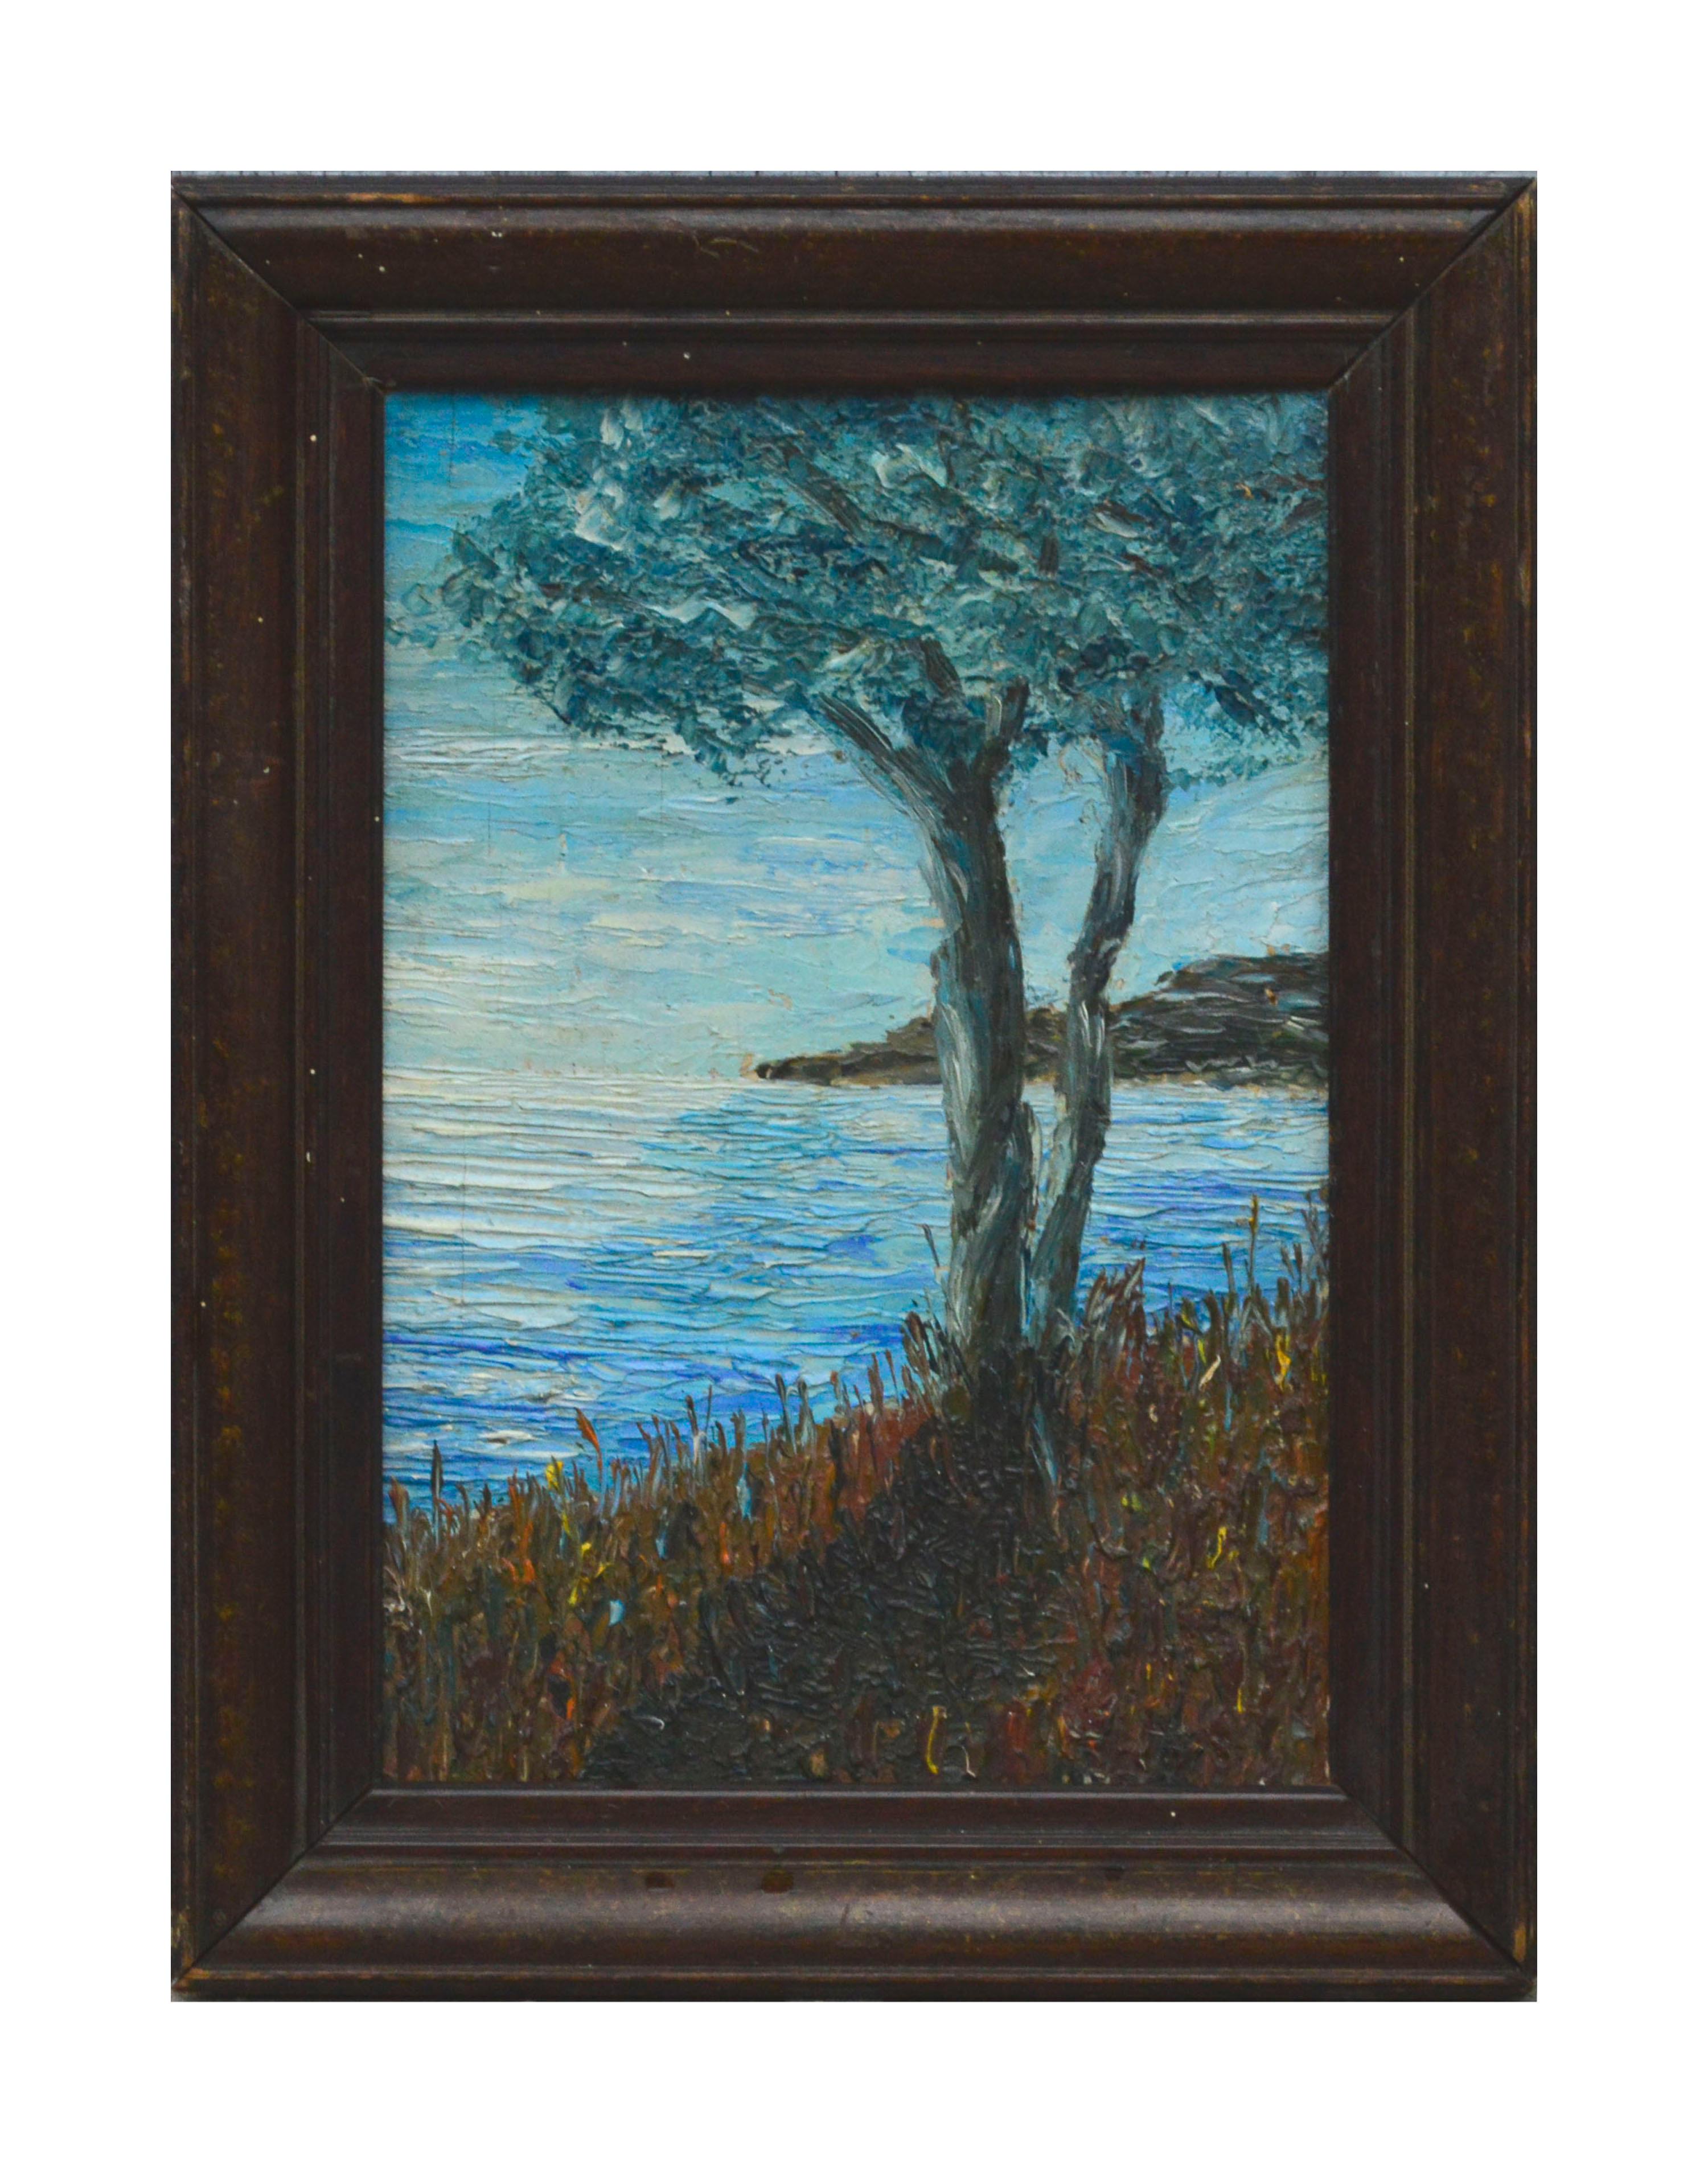 Unknown Landscape Painting - Tree by the Bay, Small-Scale Mid Century Coastal Landscape 